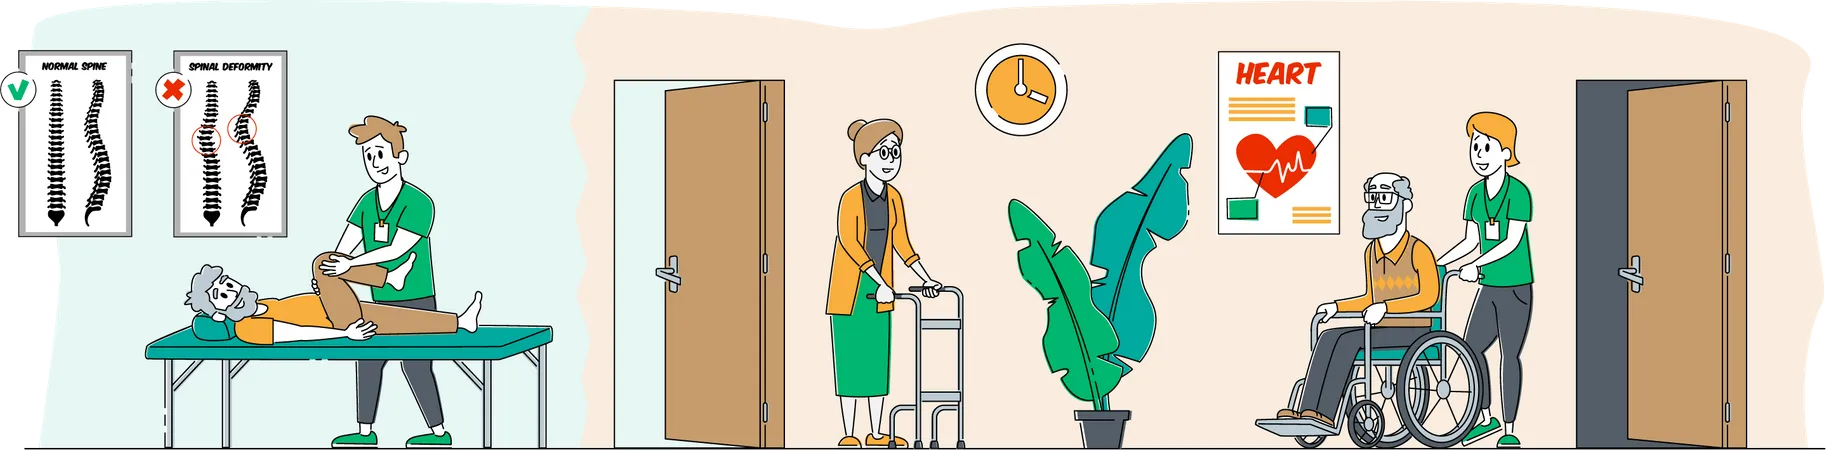 Help Old Disabled People in Nursing Home. Social Worker Community Care of Senior Characters on Wheelchair, Skilled Nurse Residential Healthcare, Physical Therapy Service. Linear Vector Illustration  Illustration